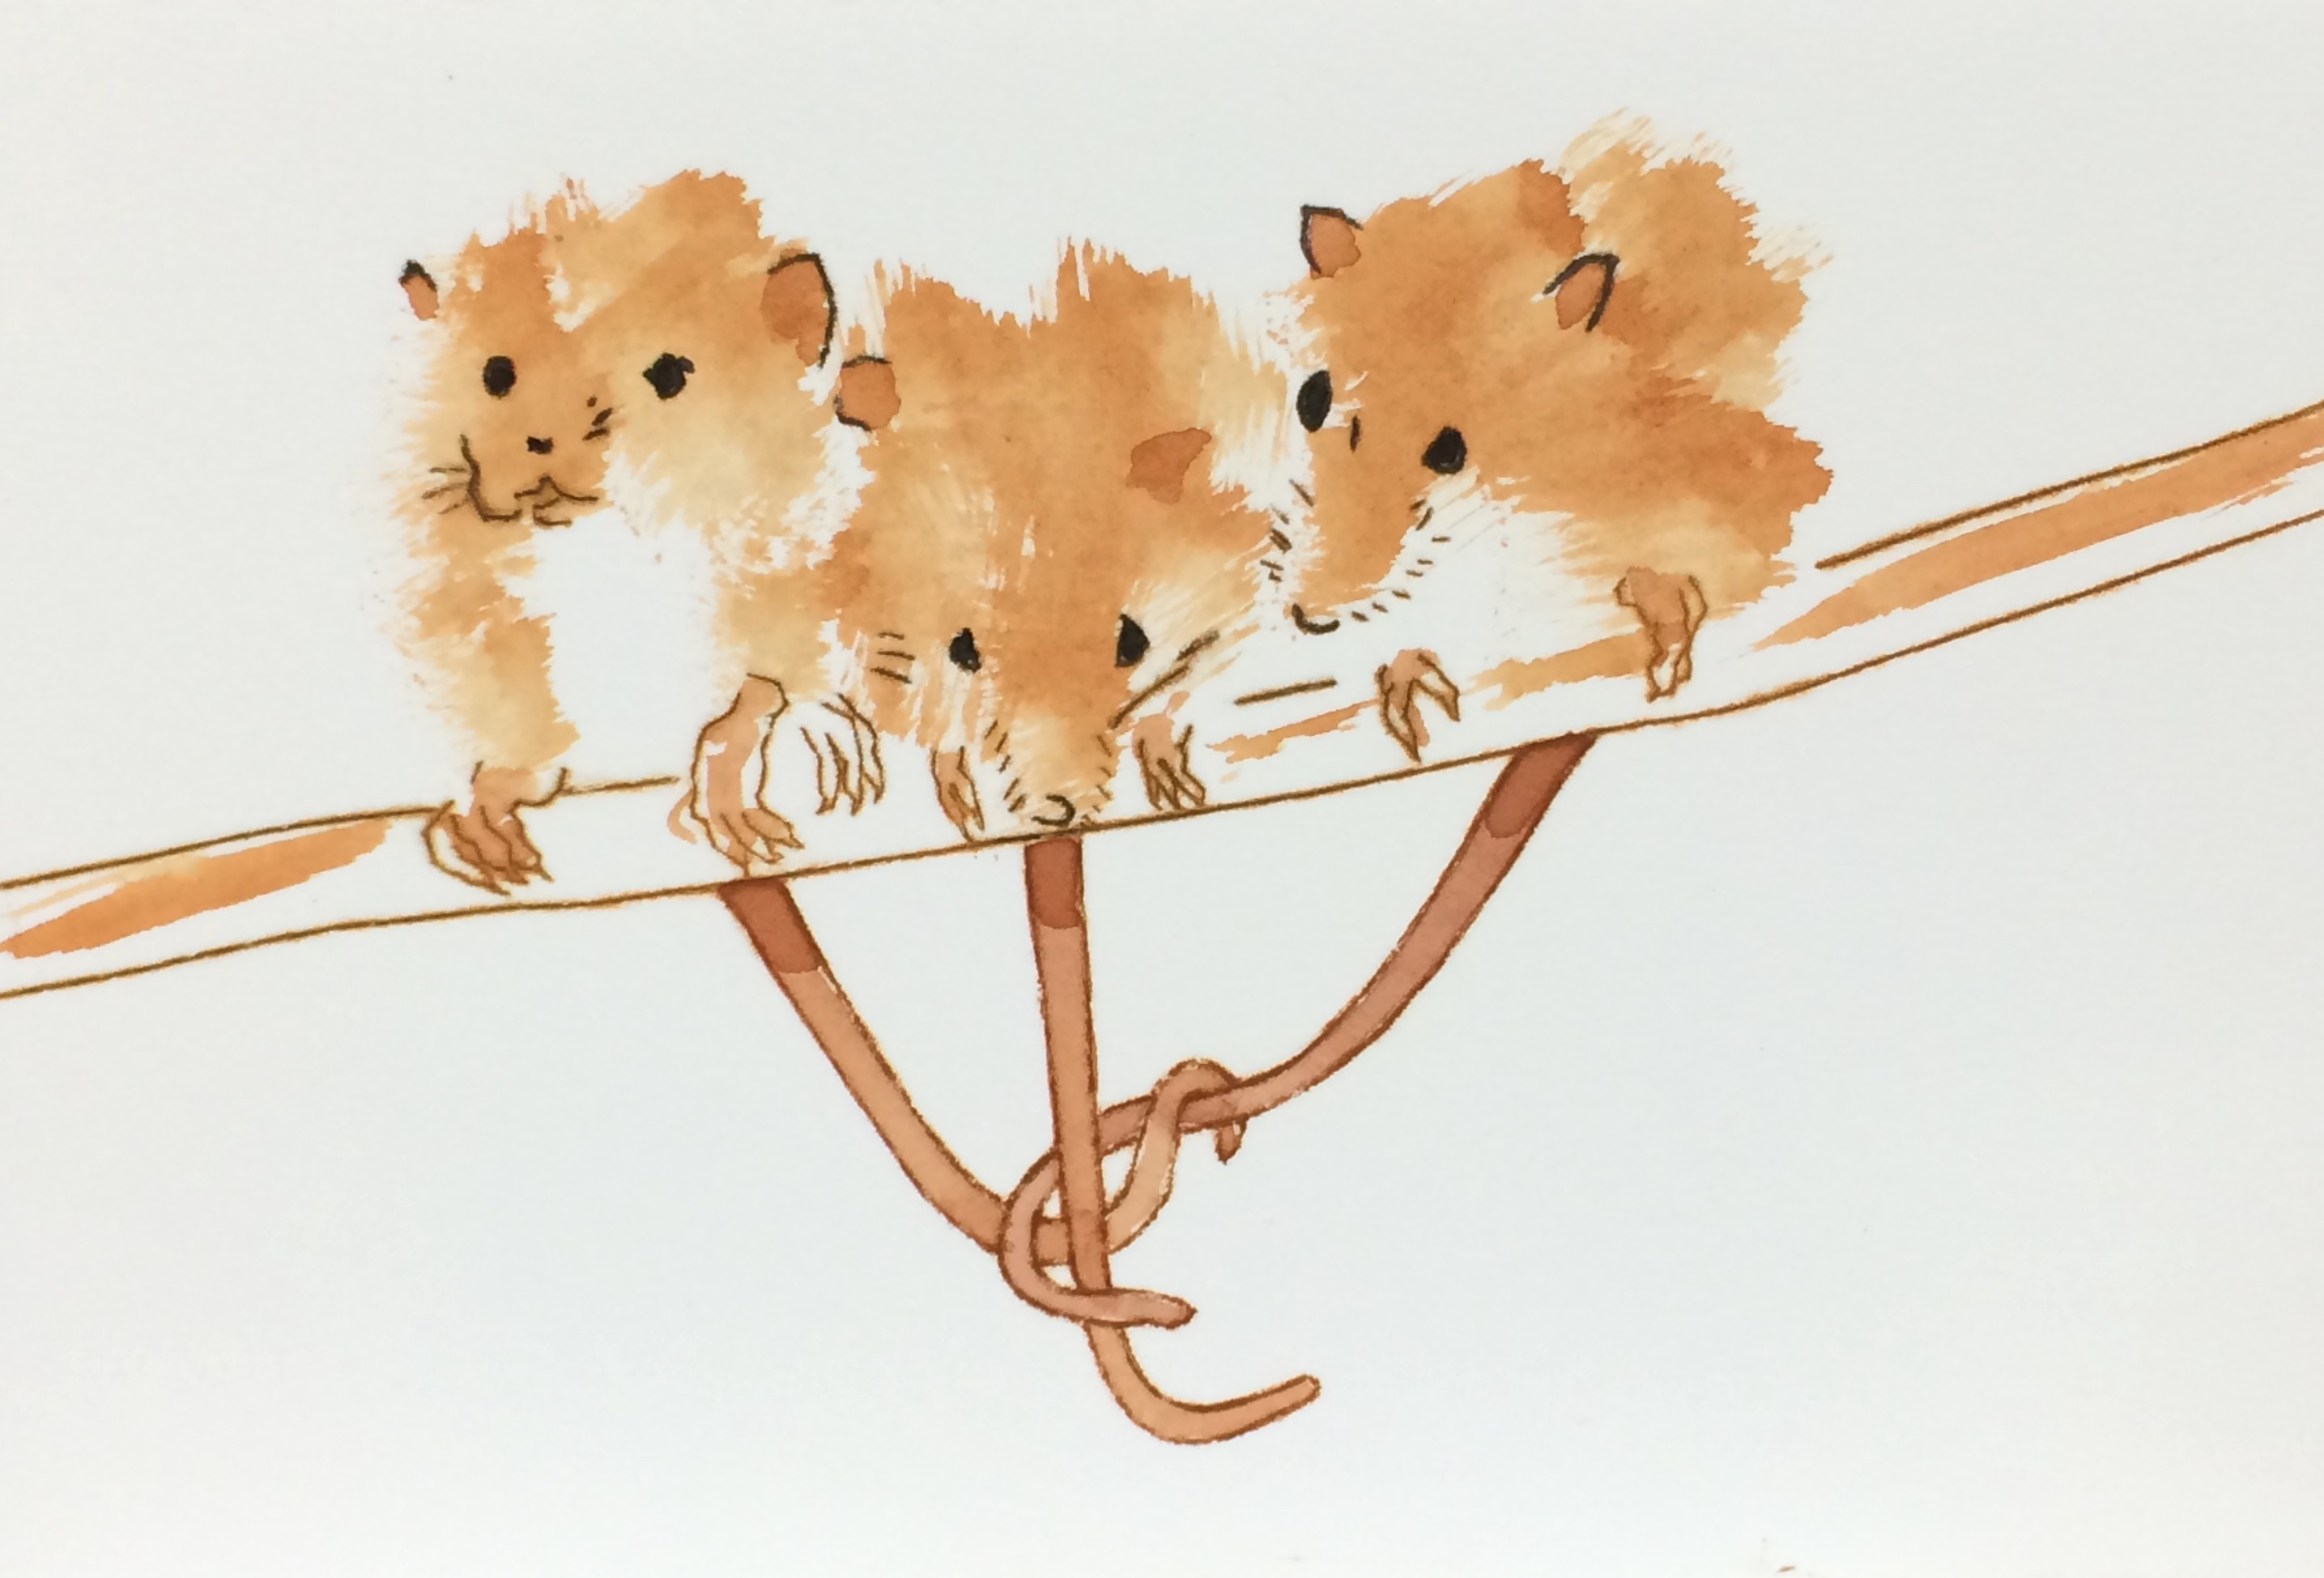 painting of three mice on a branch with their tails intertwined as one